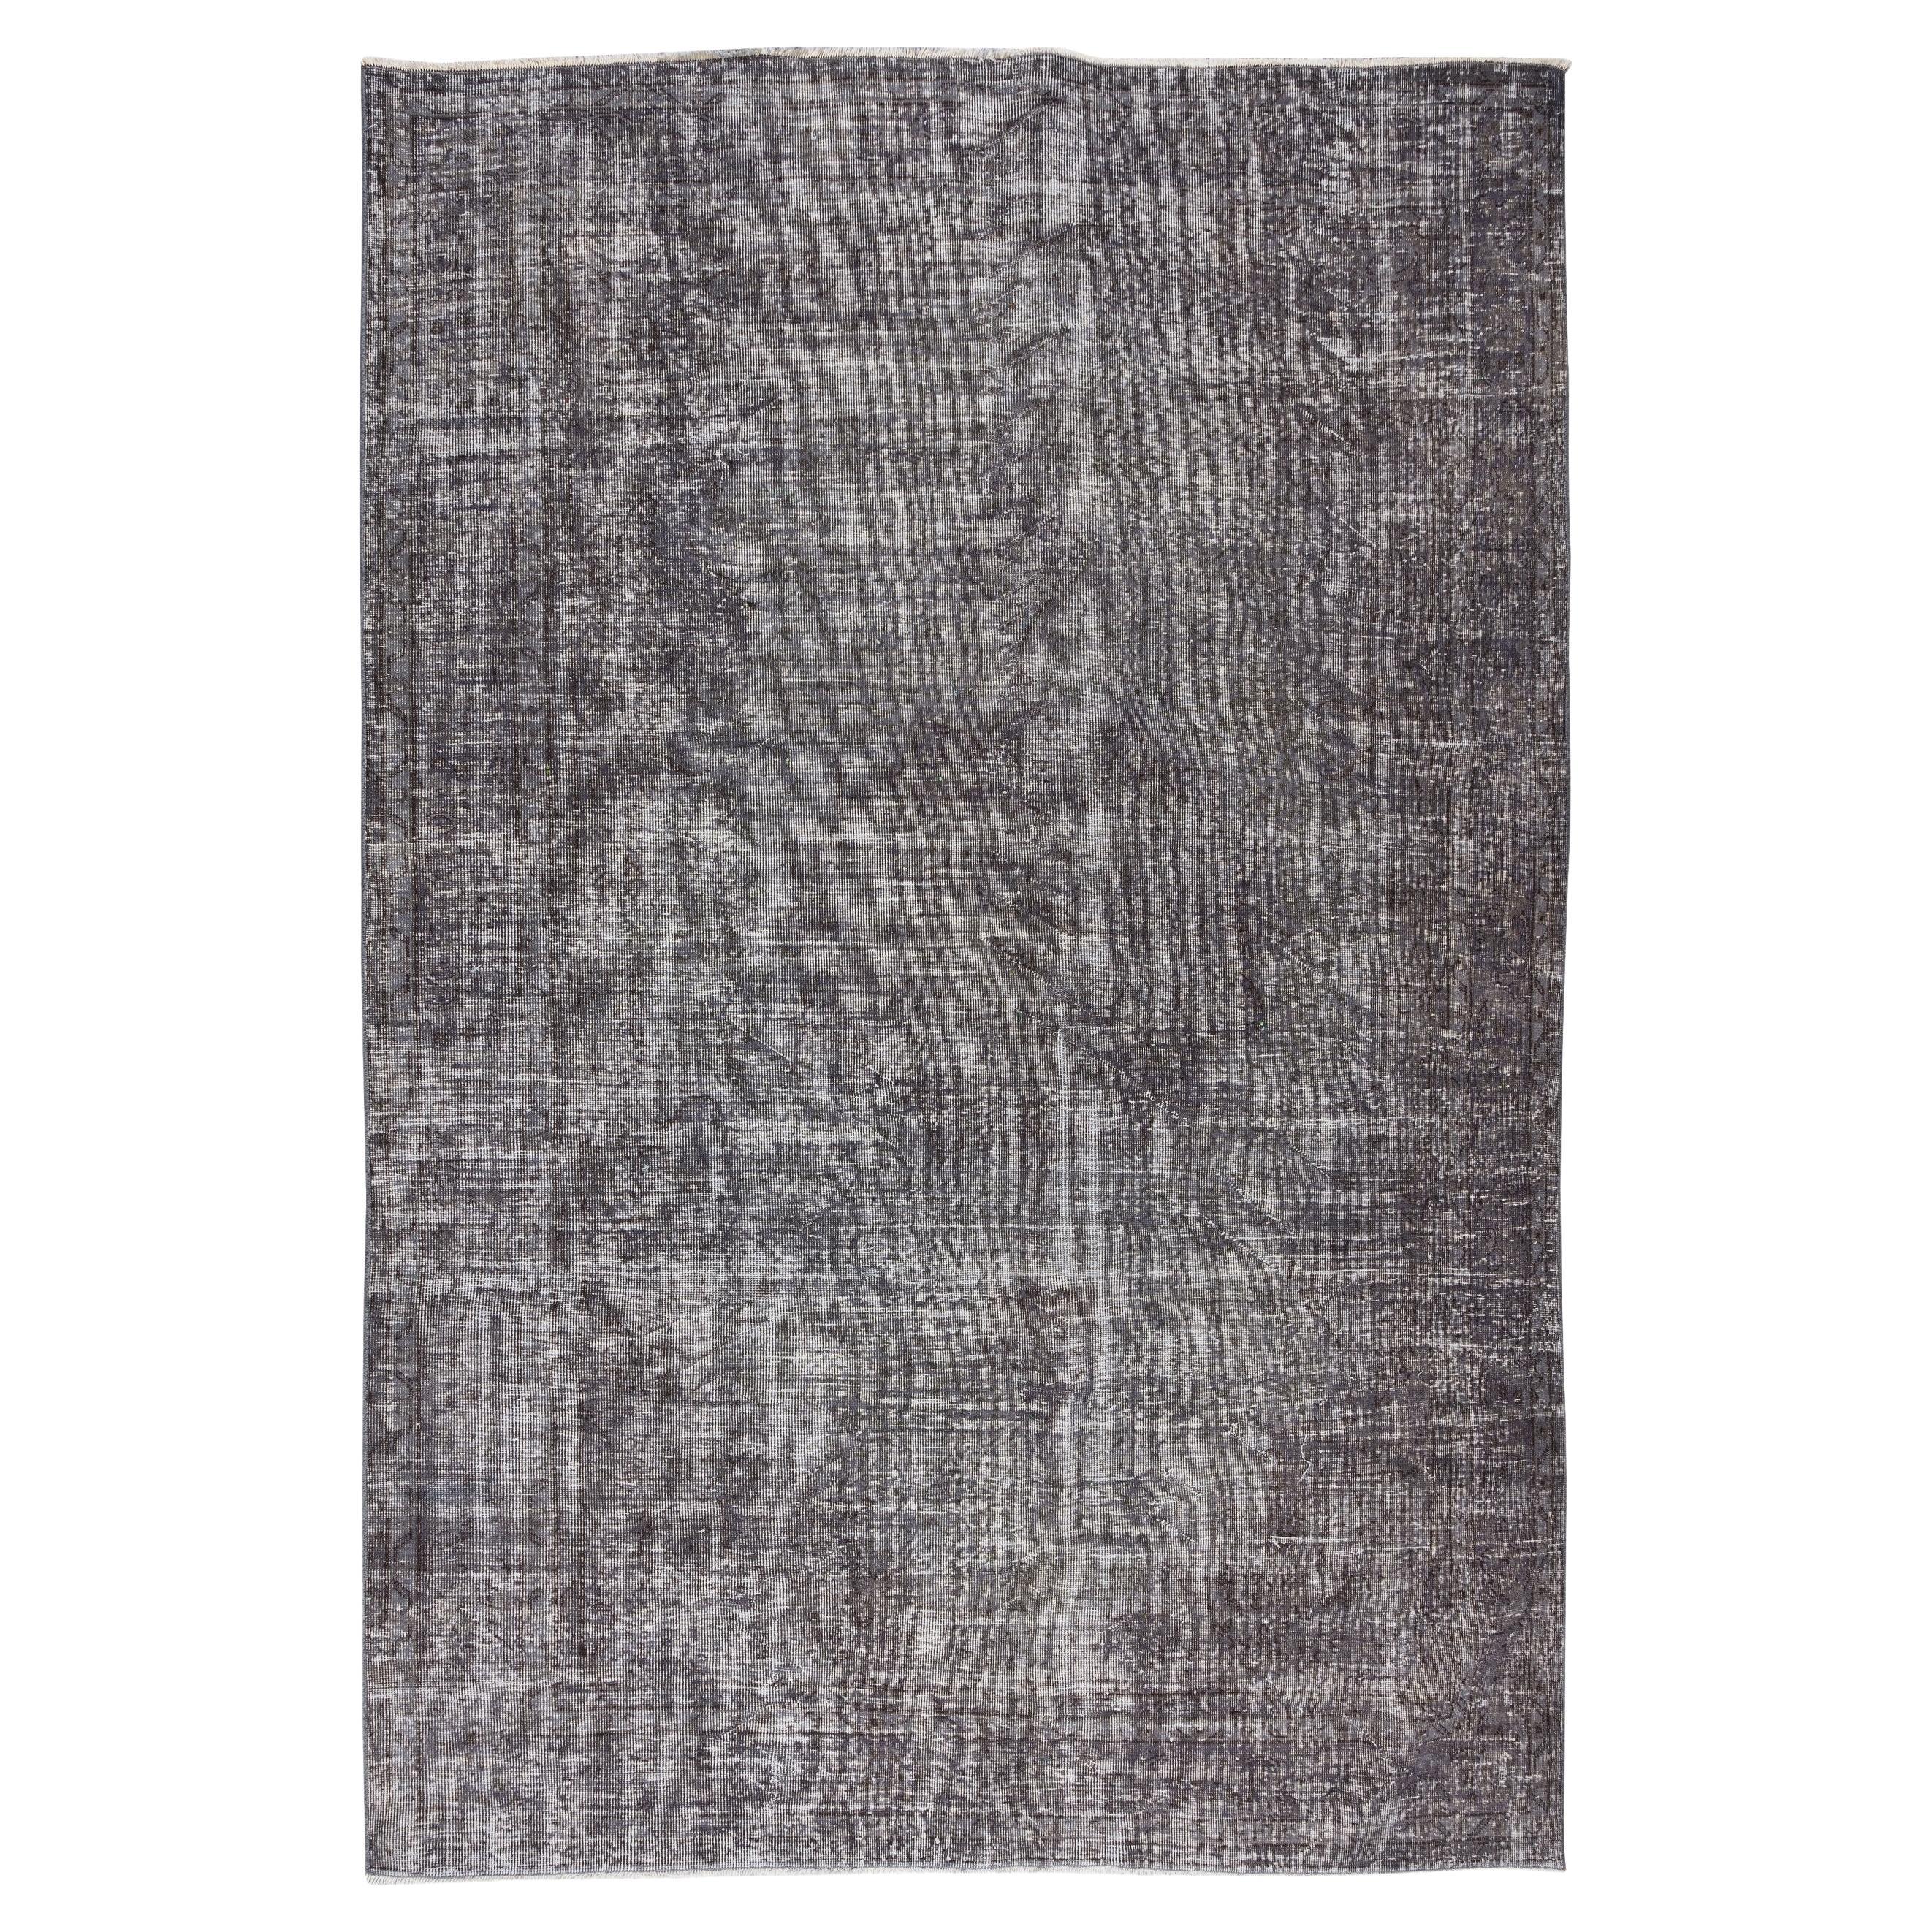 7x10 Ft Vintage Hand-Knotted Turkish Rug Over-Dyed in Gray for Modern Interior